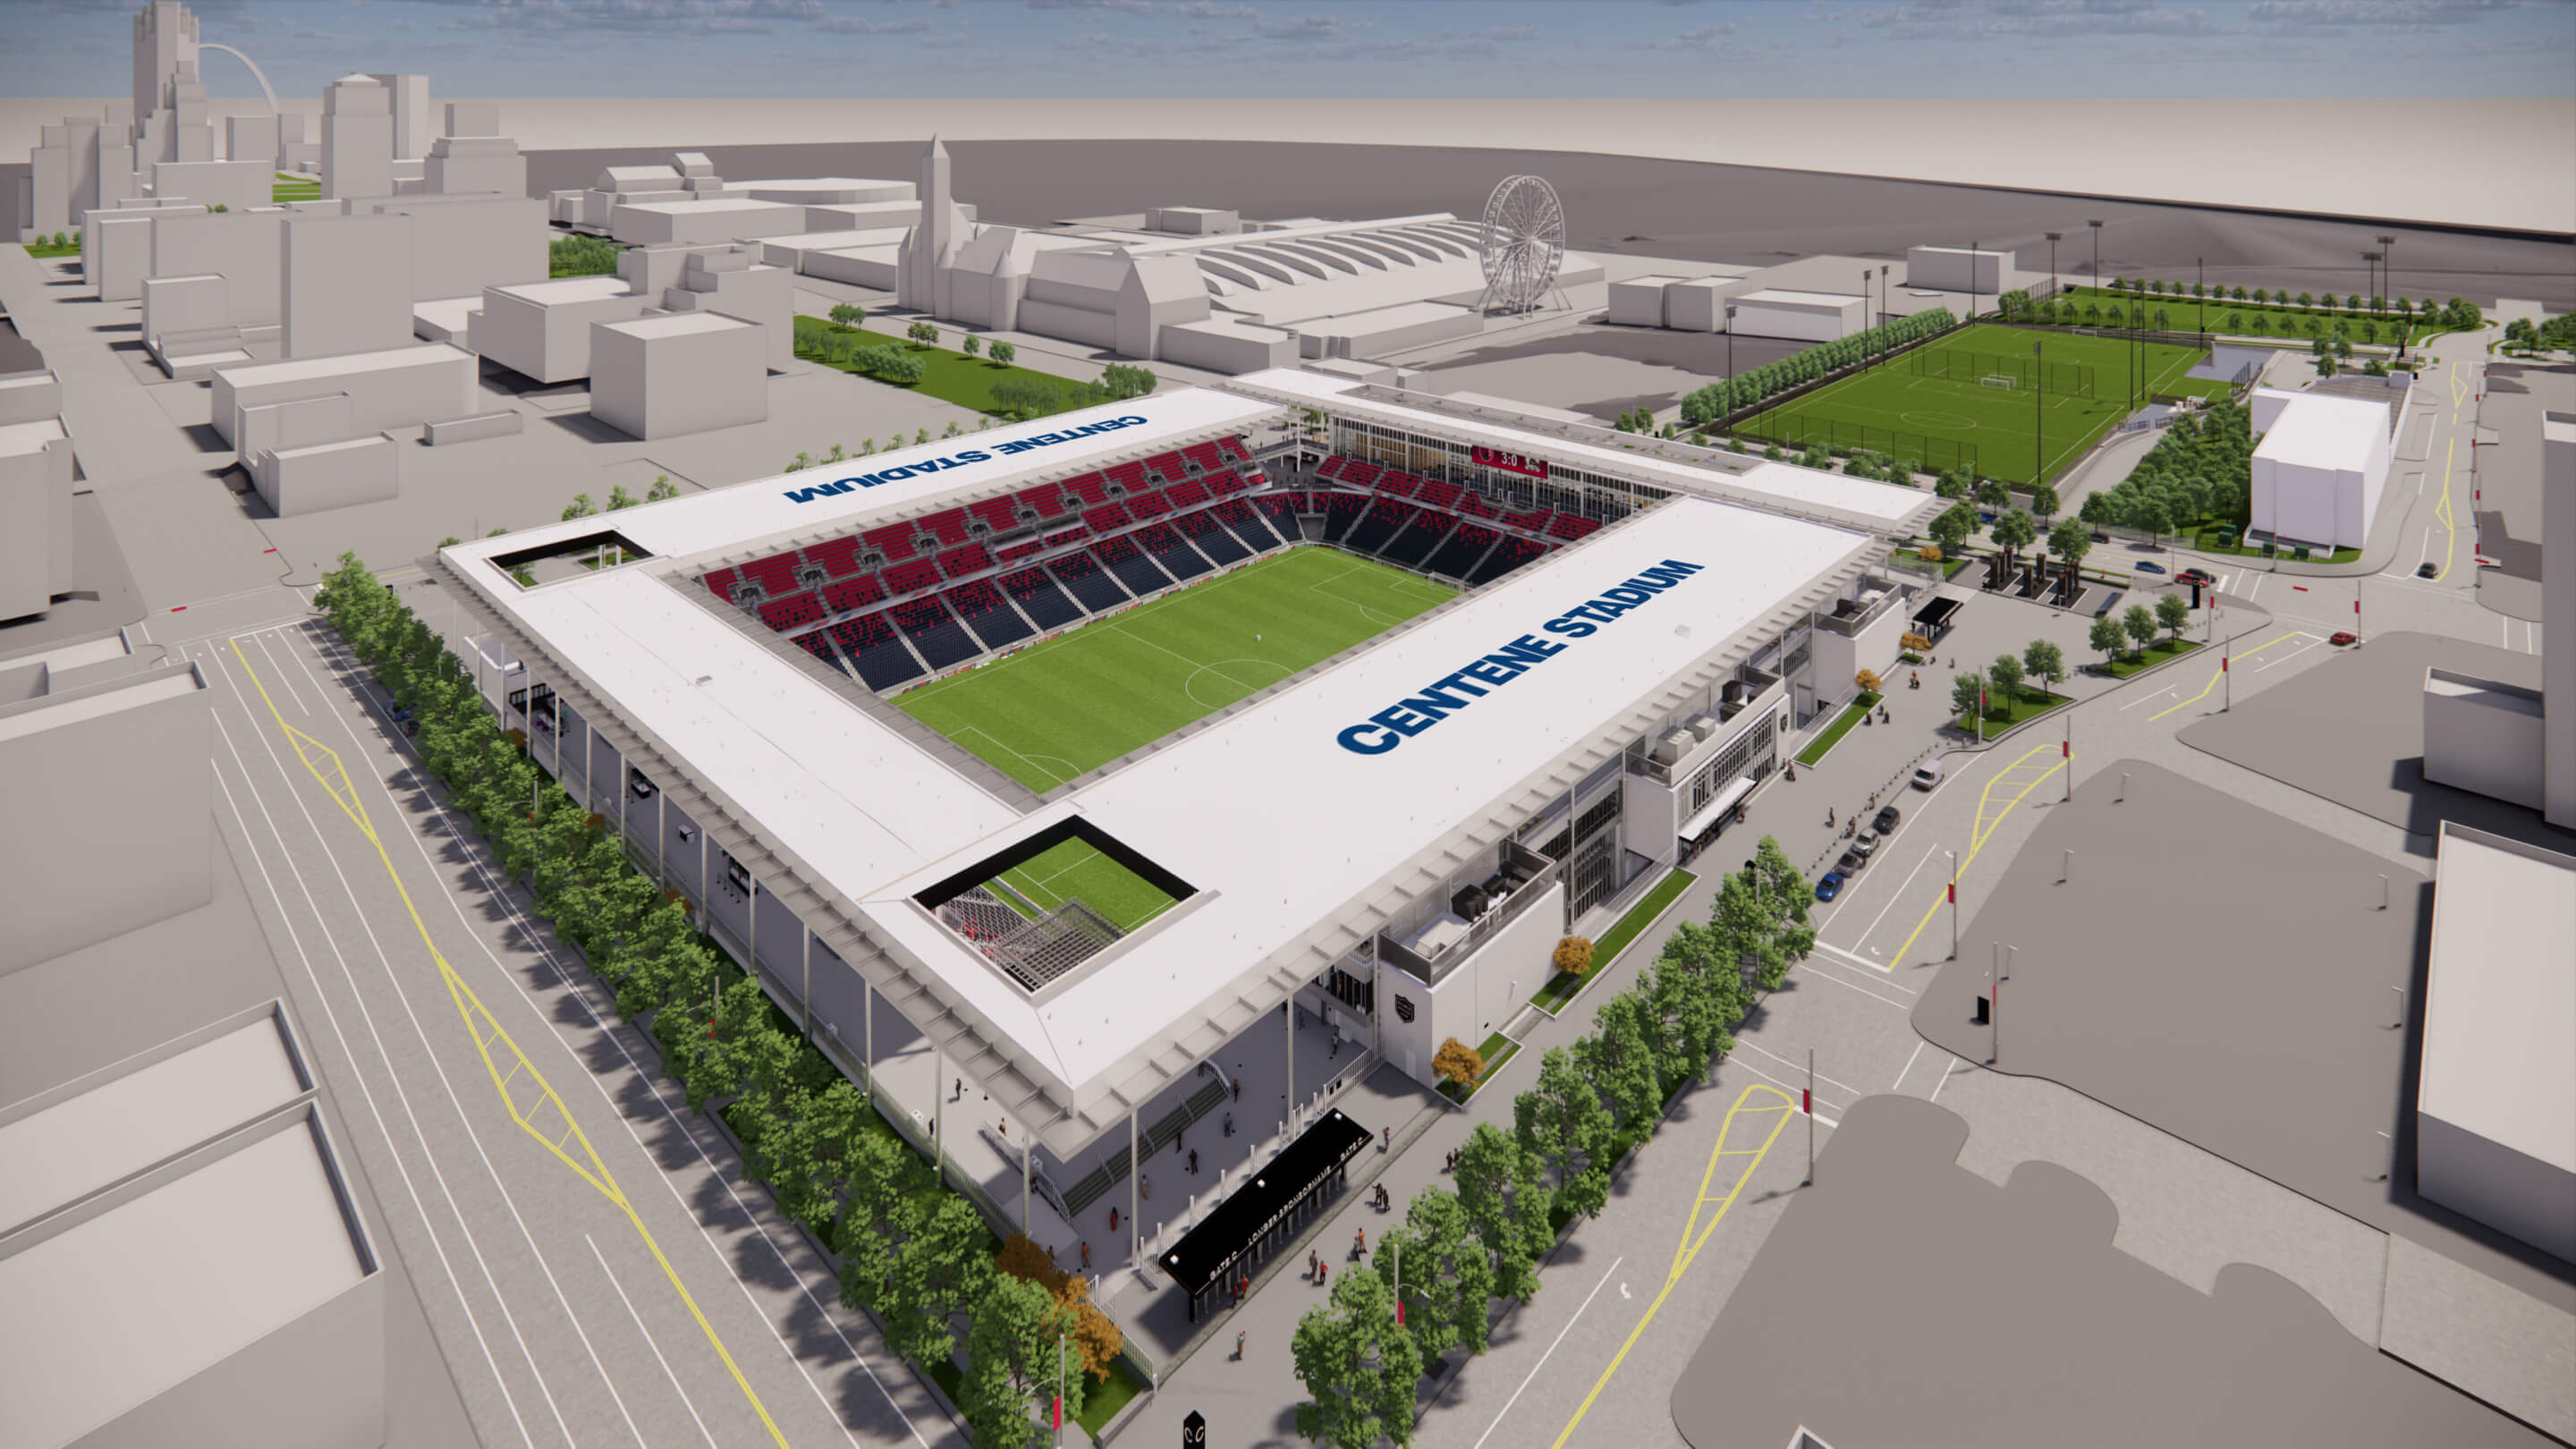 MLS expansion team St. Louis City SC opens Saturday in Austin, Texas